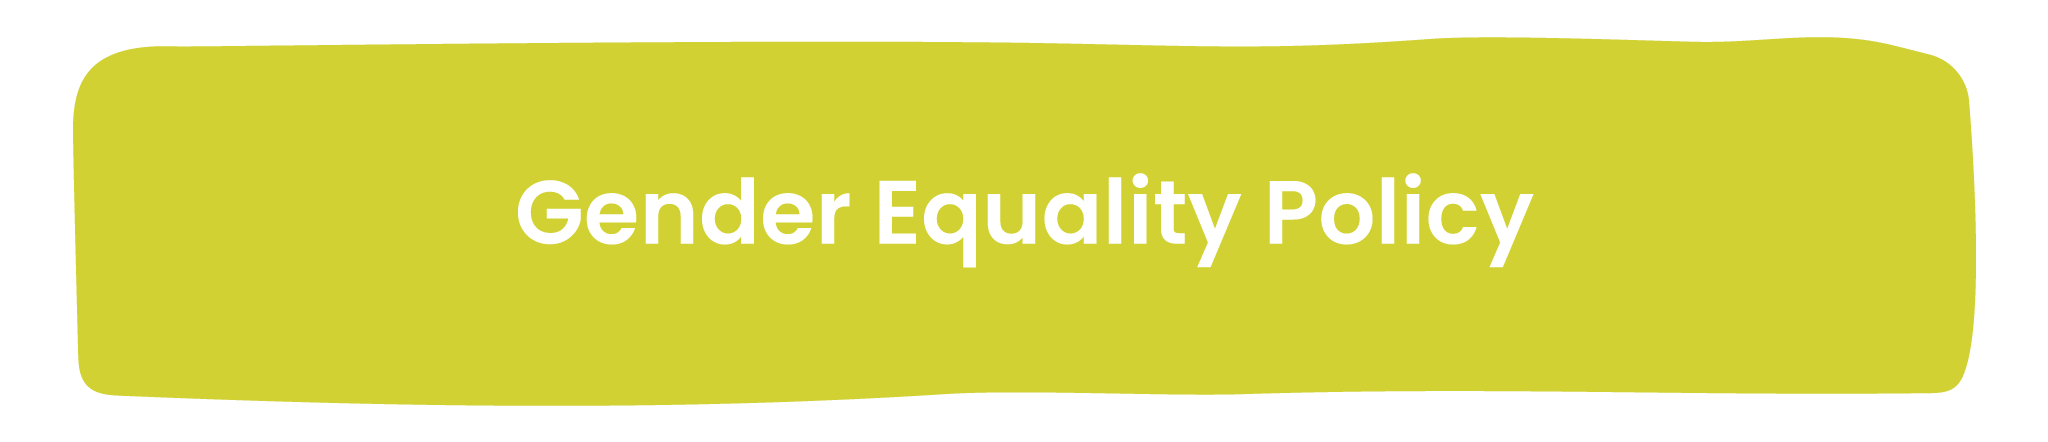 Gender Equality Policy